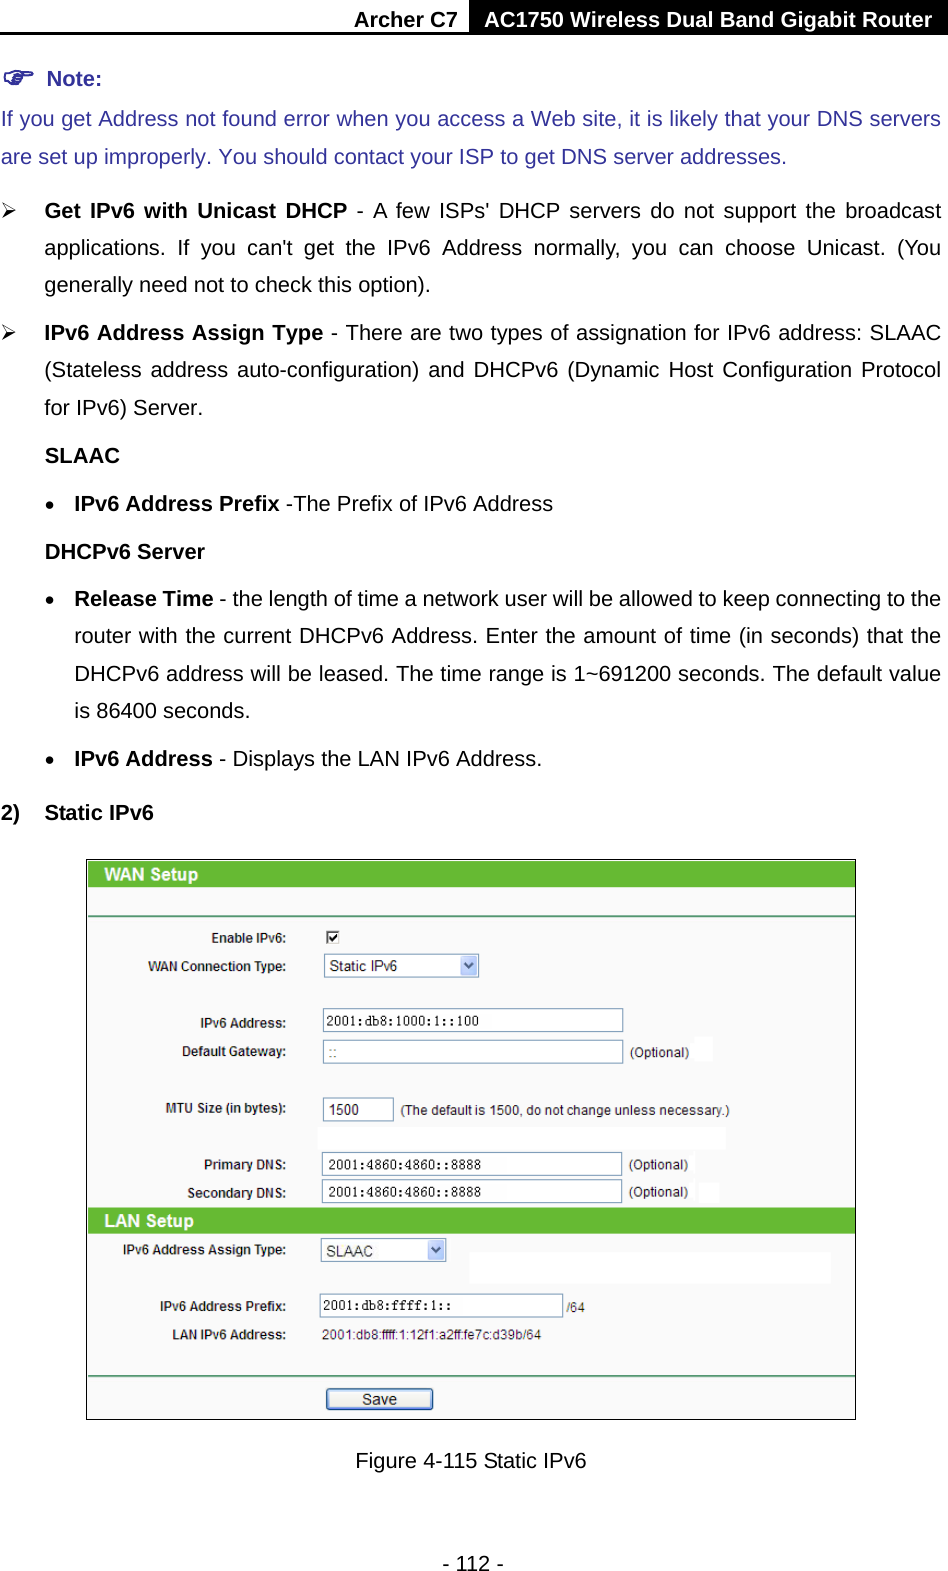 Archer C7 AC1750 Wireless Dual Band Gigabit Router  - 112 -  Note: If you get Address not found error when you access a Web site, it is likely that your DNS servers are set up improperly. You should contact your ISP to get DNS server addresses.  Get IPv6 with Unicast DHCP - A few ISPs&apos; DHCP servers do not support the broadcast applications. If you can&apos;t get the IPv6 Address normally, you can choose Unicast. (You generally need not to check this option).  IPv6 Address Assign Type - There are two types of assignation for IPv6 address: SLAAC (Stateless address auto-configuration) and DHCPv6 (Dynamic Host Configuration Protocol for IPv6) Server. SLAAC • IPv6 Address Prefix -The Prefix of IPv6 Address DHCPv6 Server • Release Time - the length of time a network user will be allowed to keep connecting to the router with the current DHCPv6 Address. Enter the amount of time (in seconds) that the DHCPv6 address will be leased. The time range is 1~691200 seconds. The default value is 86400 seconds. • IPv6 Address - Displays the LAN IPv6 Address. 2) Static IPv6  Figure 4-115 Static IPv6 